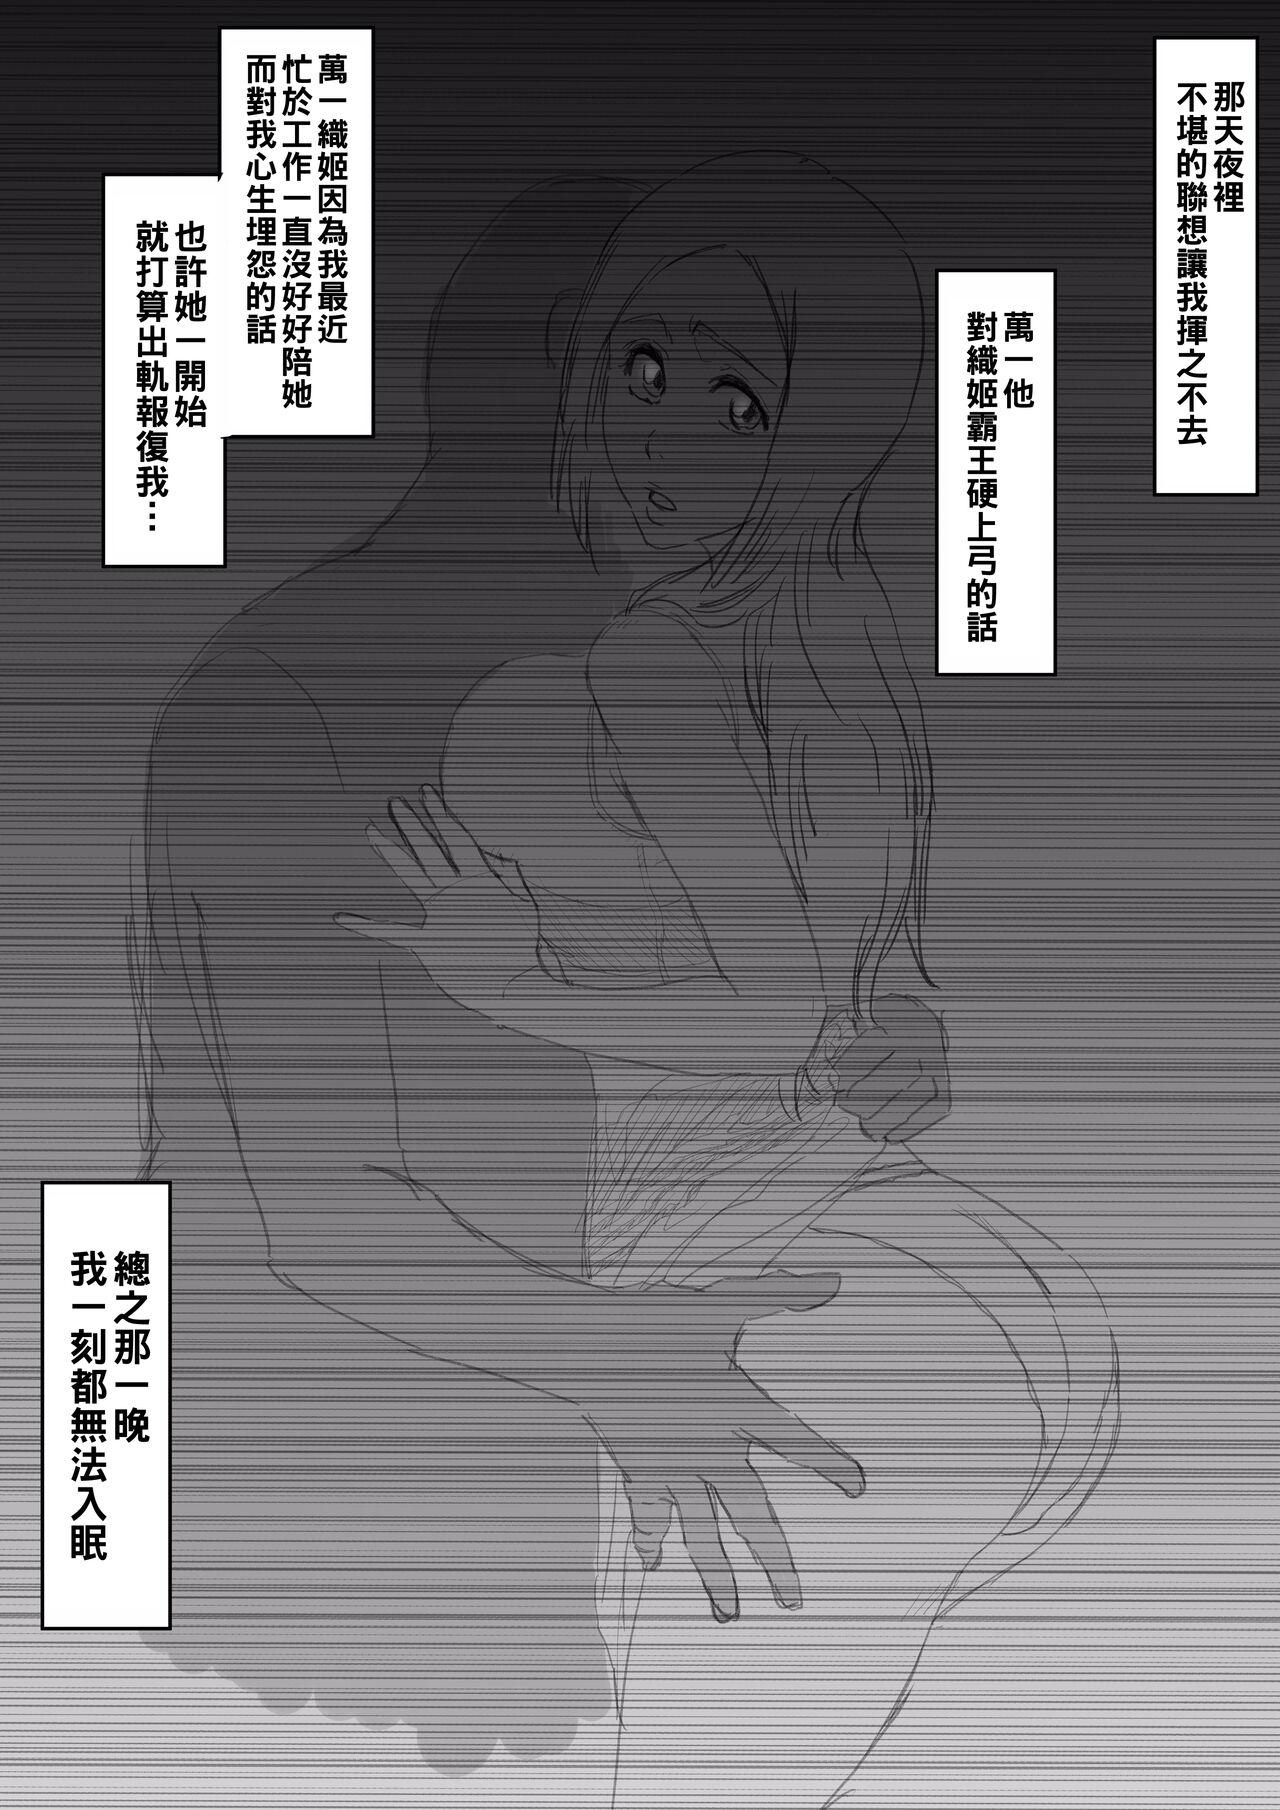 Shaven [Iwao] 織姫寝取られ・・・？ とよくあるやつ (BLEACH)（Chinese） - Bleach Mas - Page 2